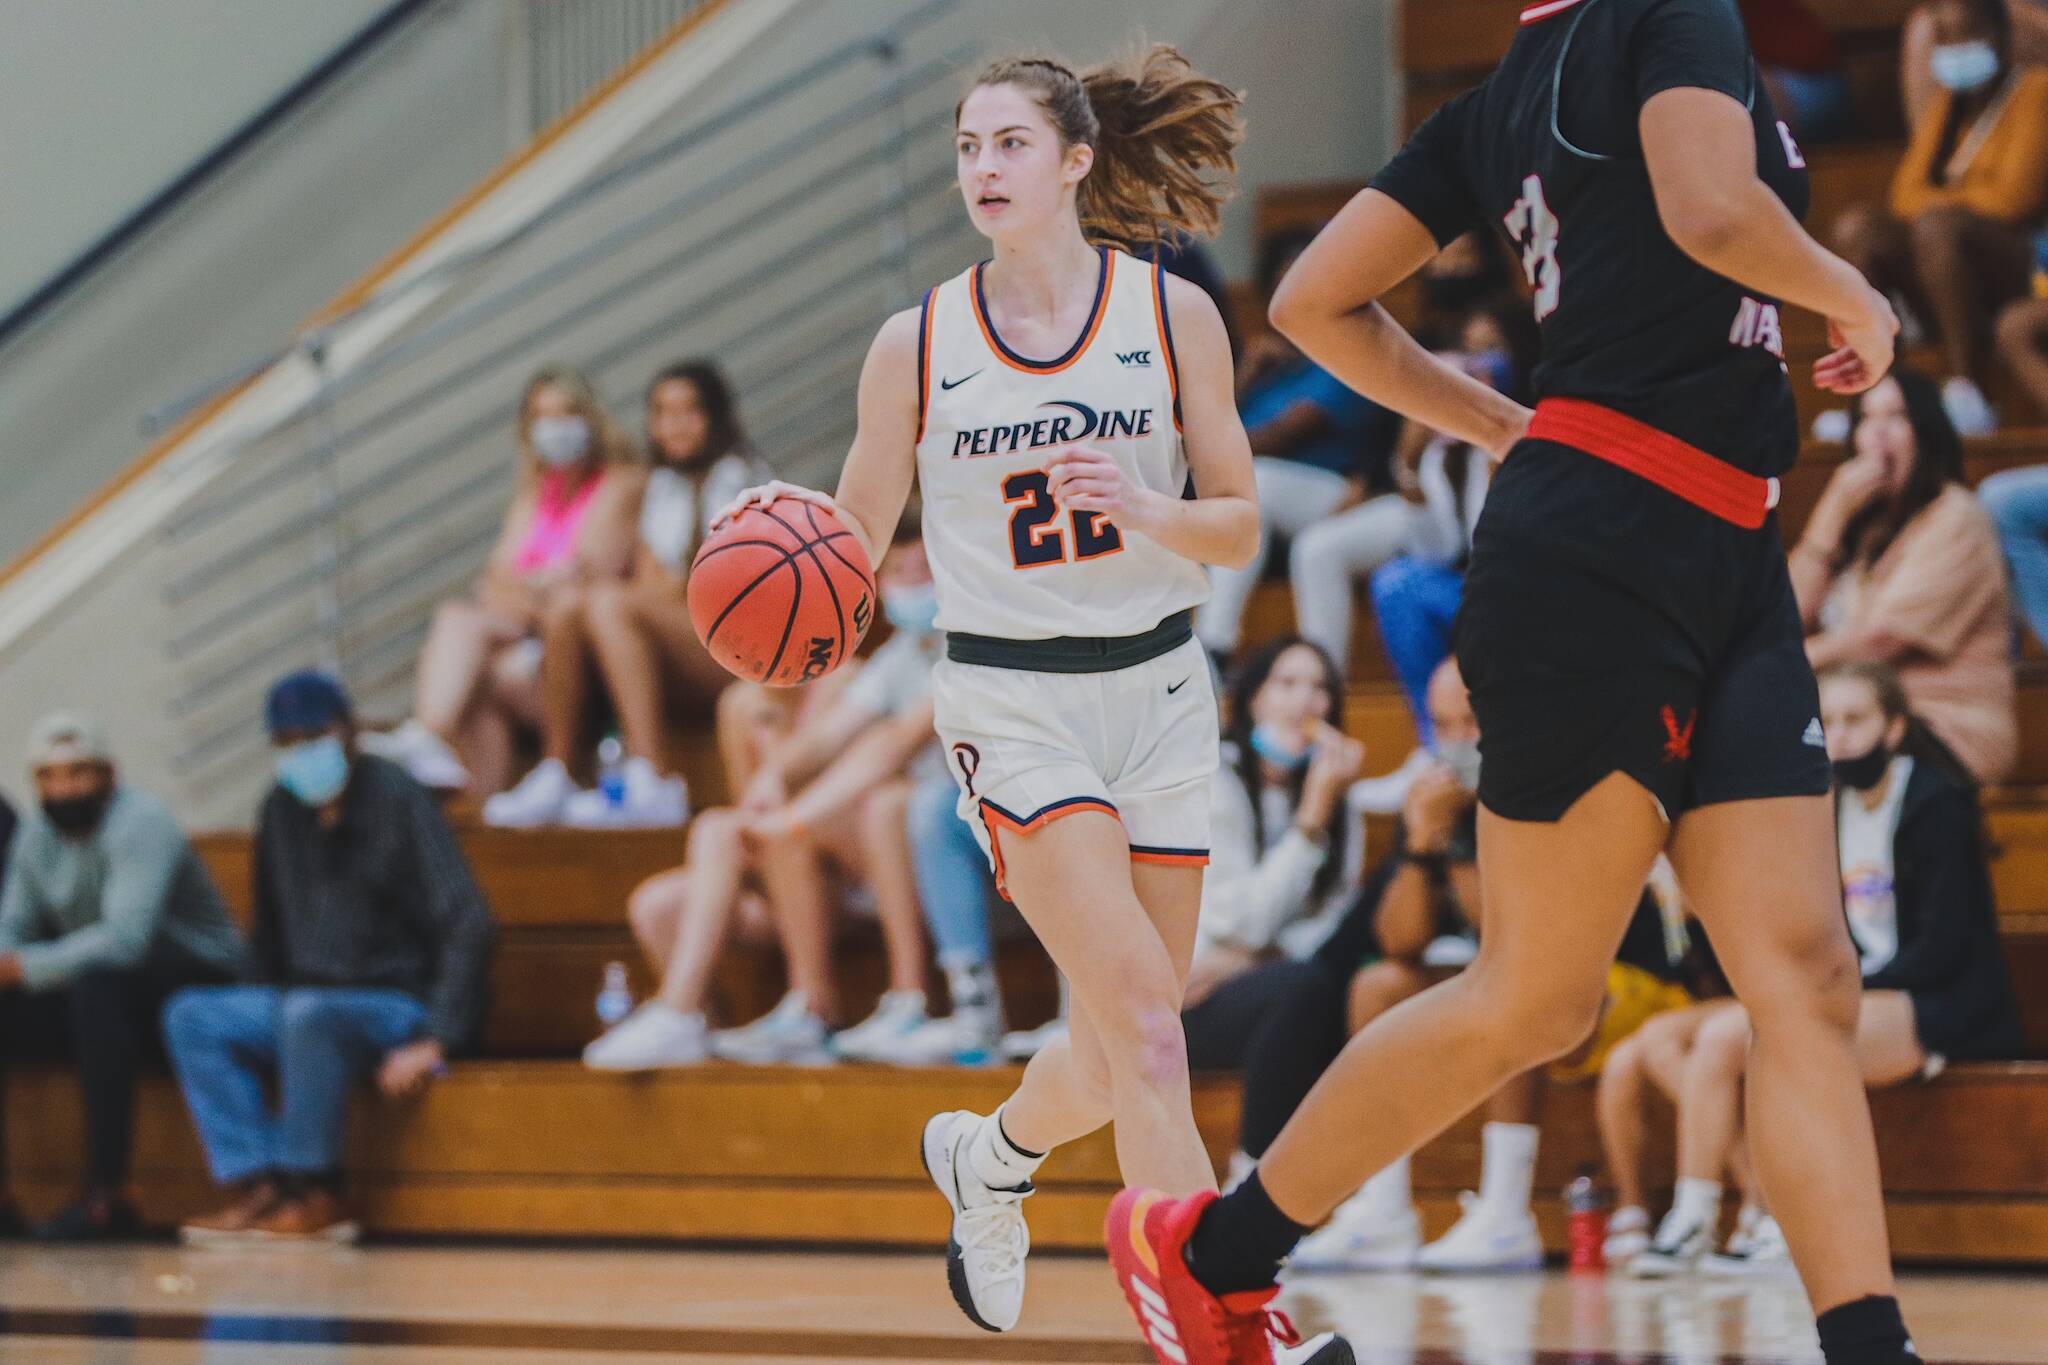 Former JDHS player Kendyl Carson is now leading the Pepperdine women’s basketball team on-court and off as the captain. (Courtesy photo / Pepperdine University)